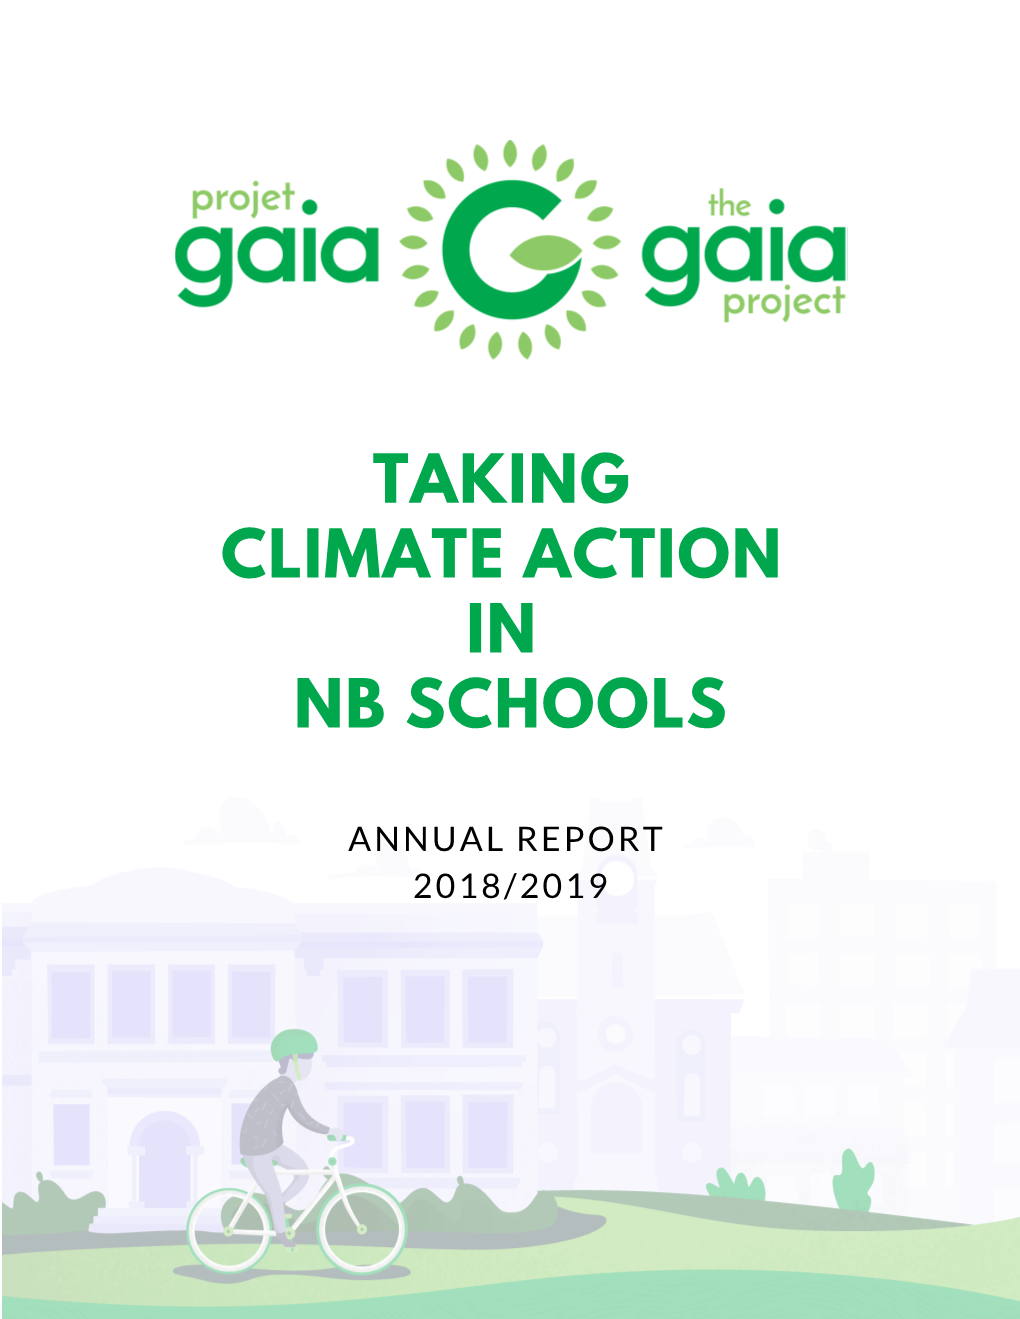 Taking Climate Action in Nb Schools